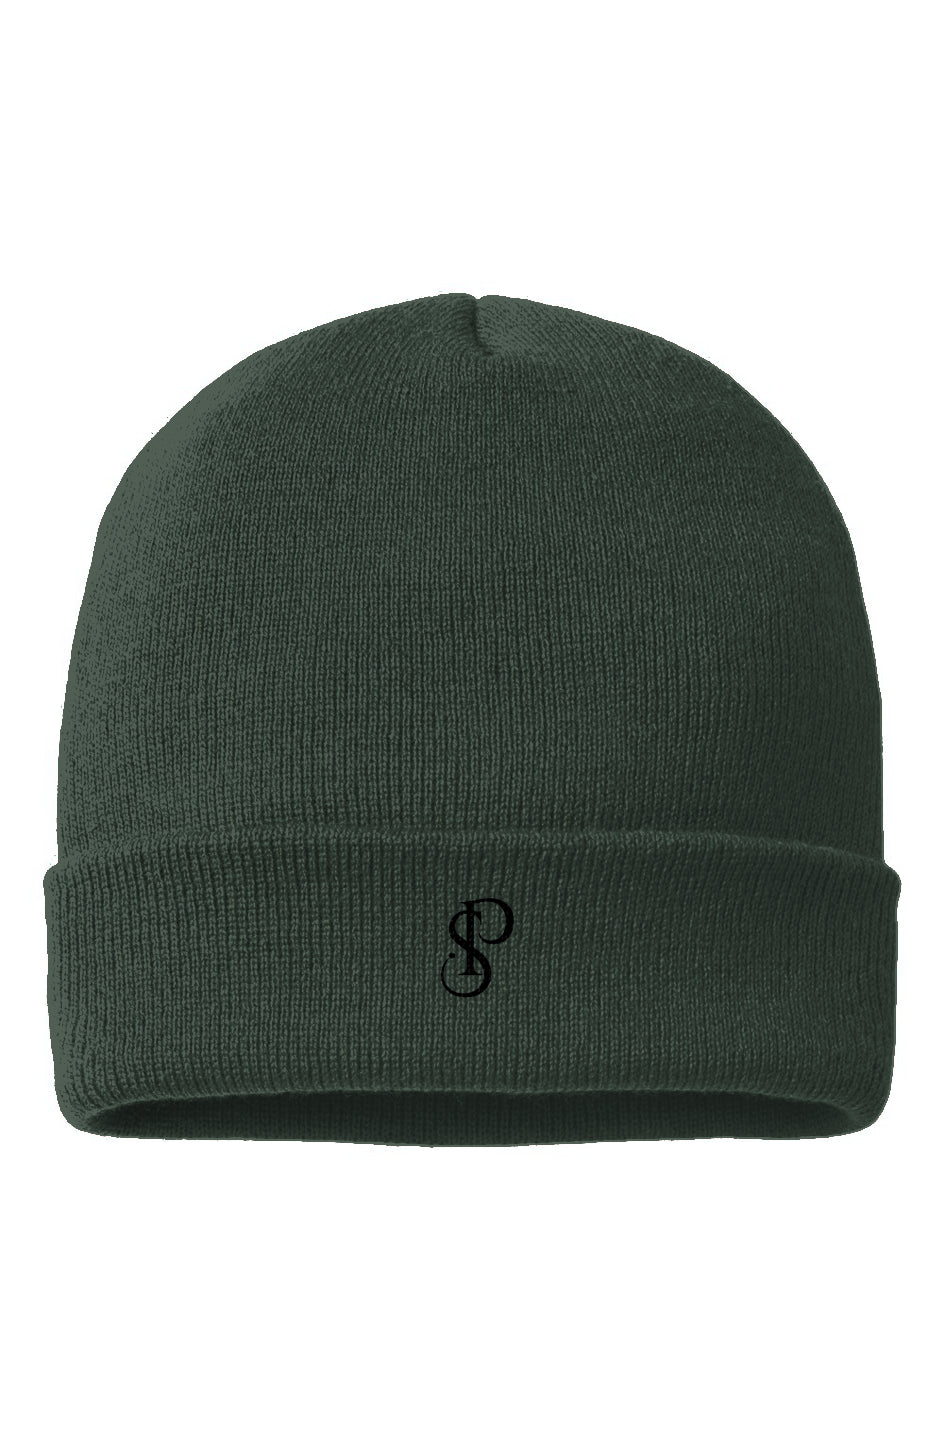 Society’s Product cuffed beanie forest green